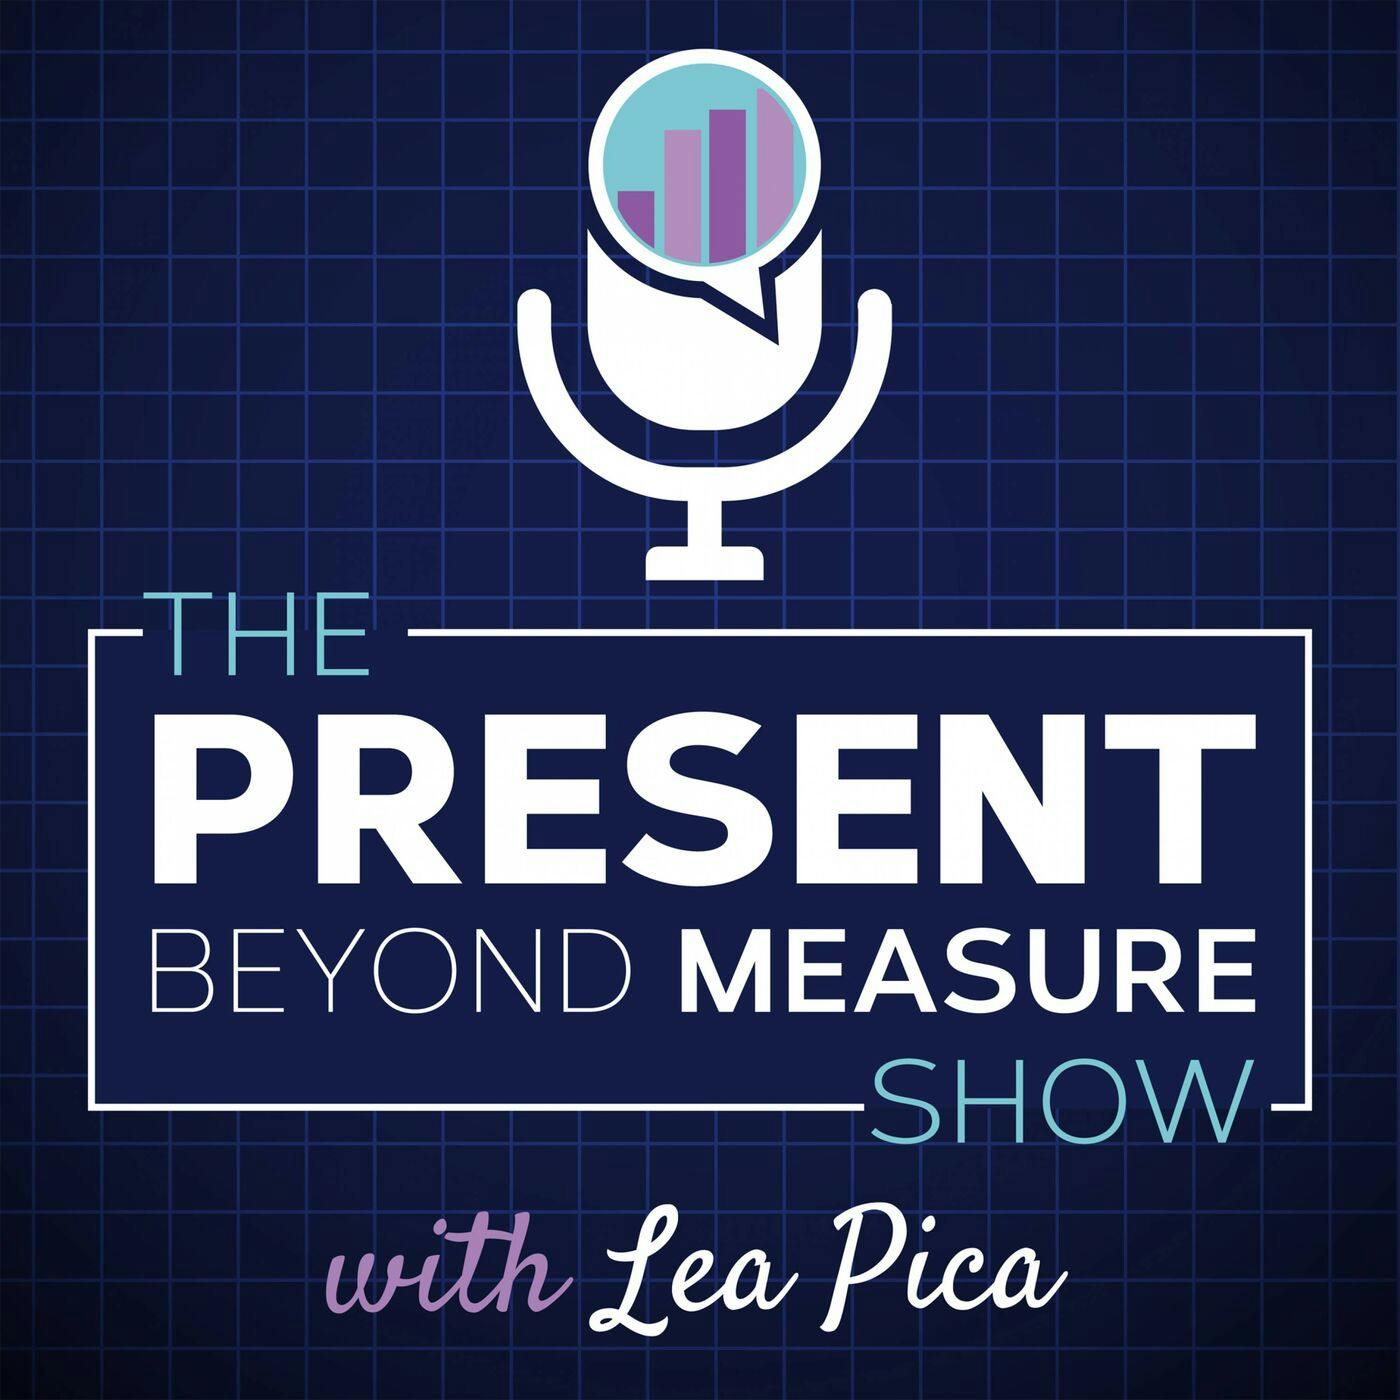 Meet Lea Pica & the Present Beyond Measure Show | Show Formalities